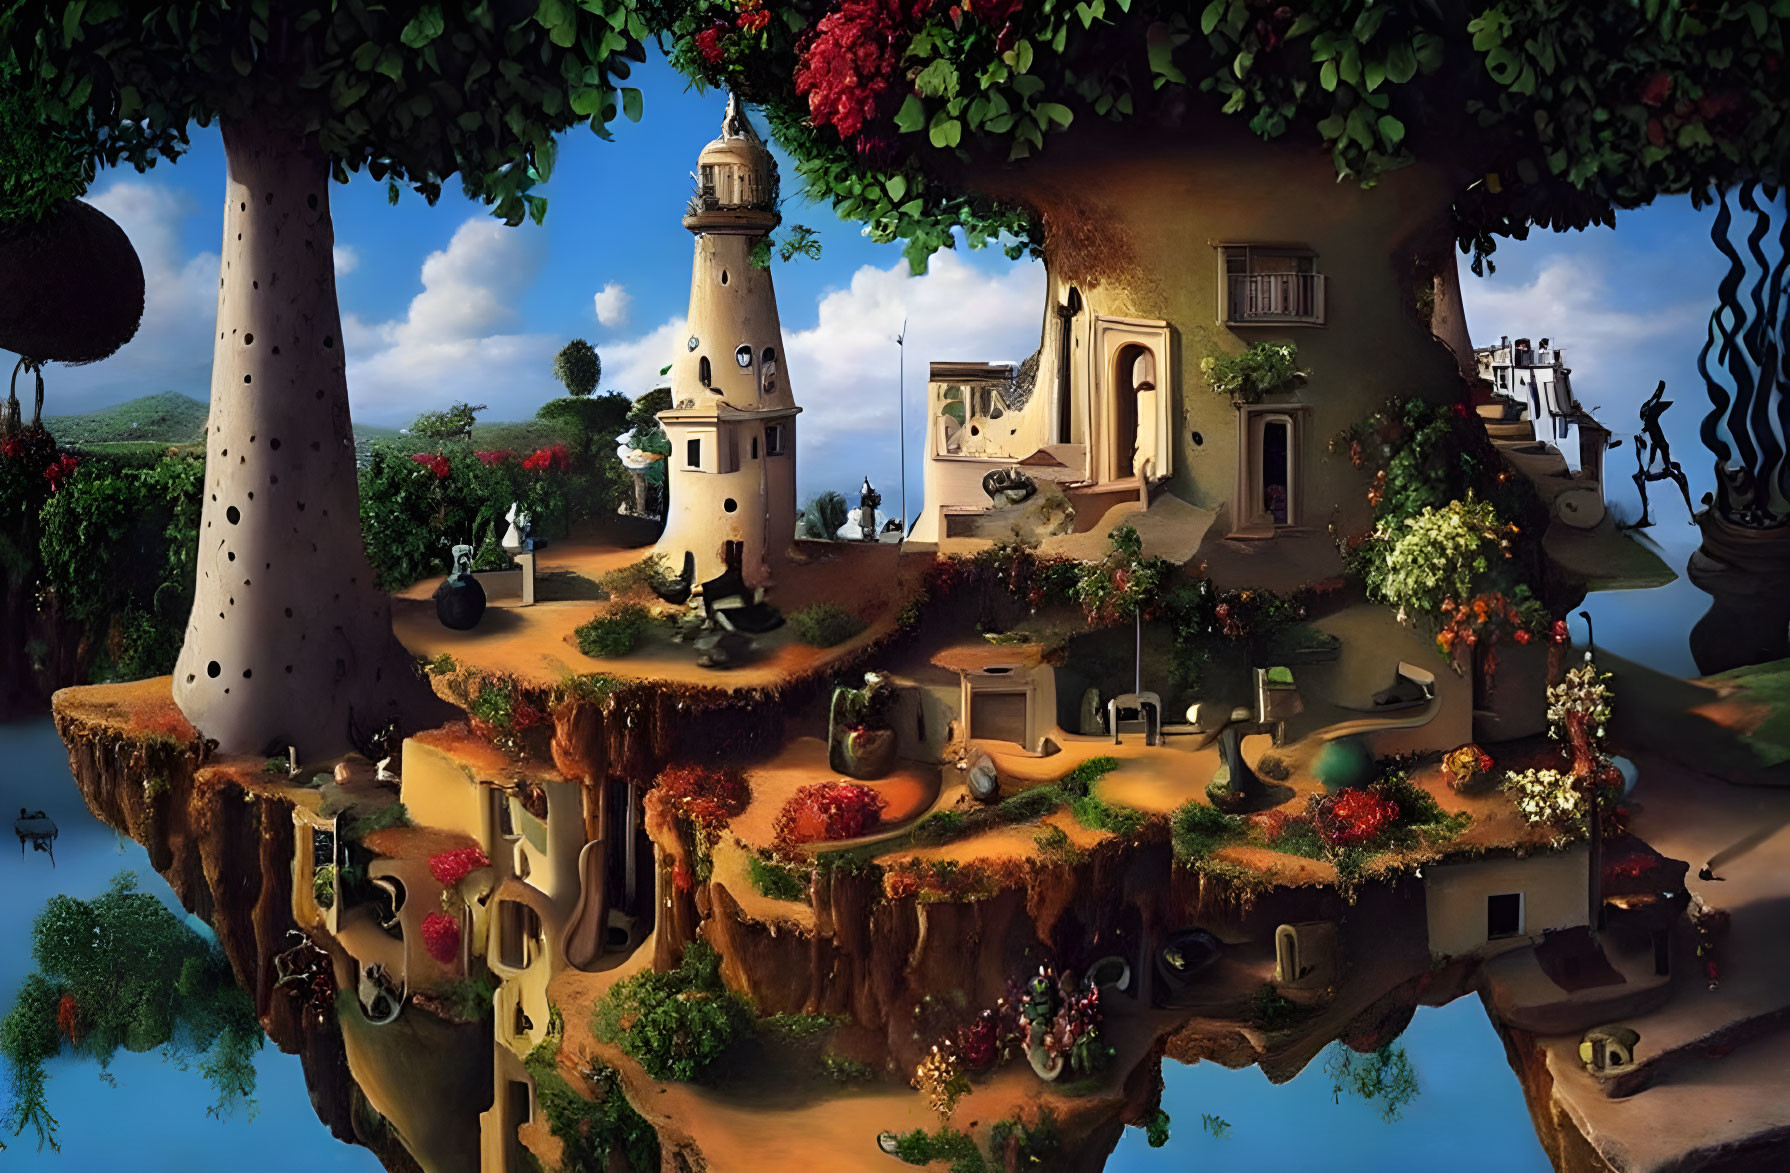 Whimsical floating island with lighthouse, tree houses, and lush greenery